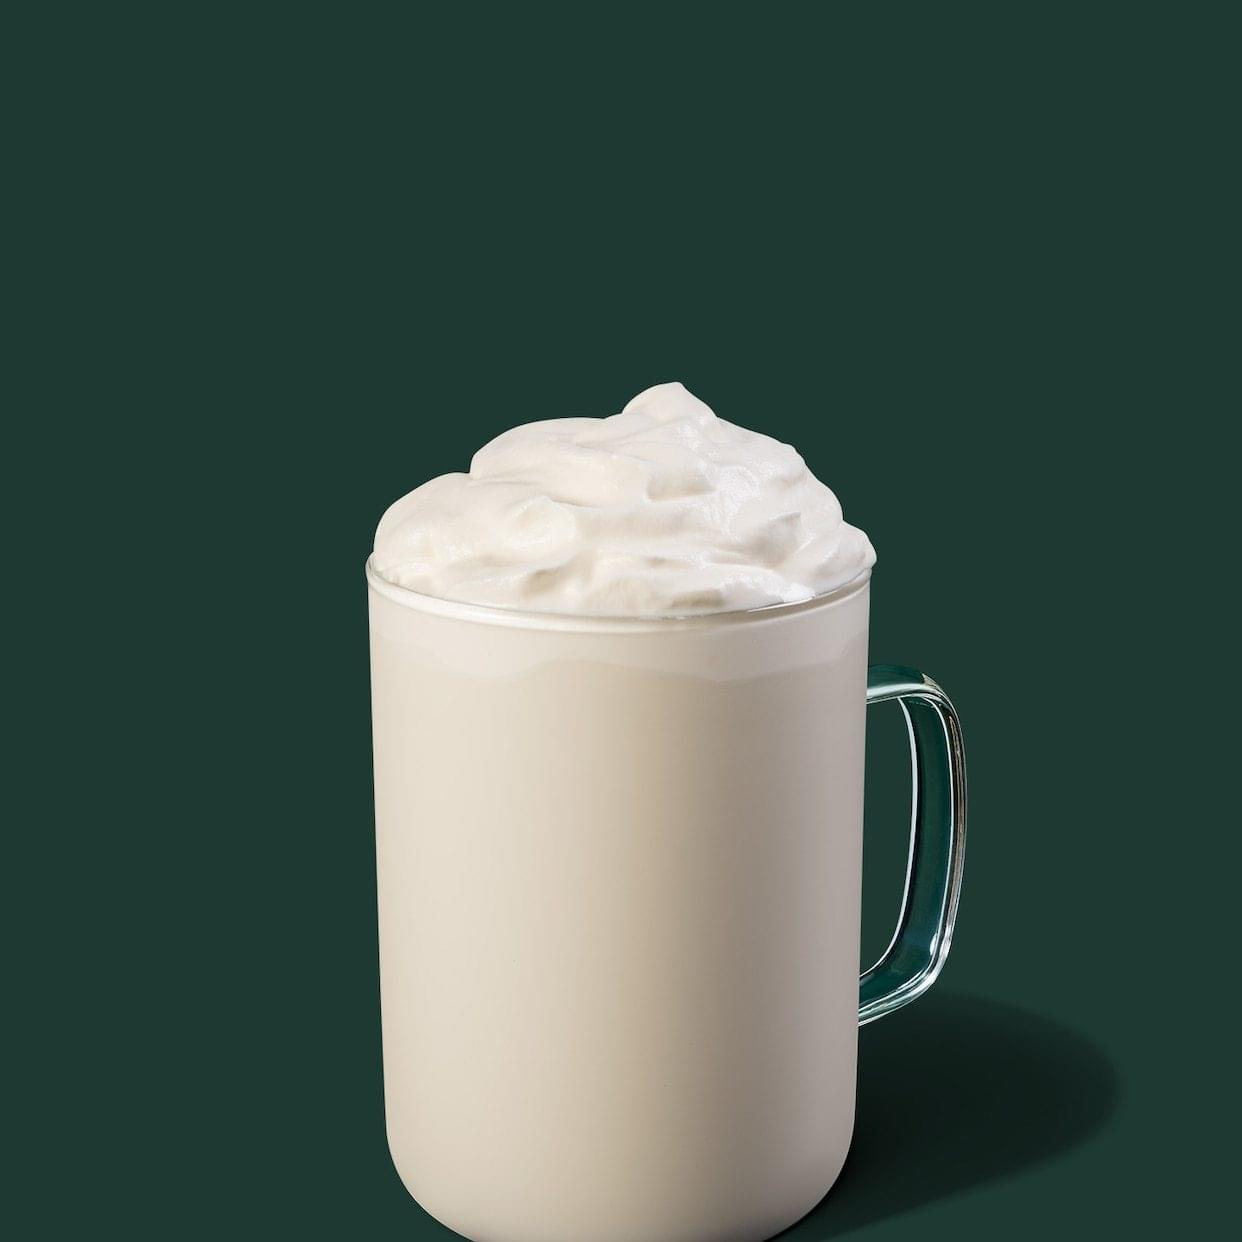 Starbucks Tall White Hot Chocolate Nutrition Facts